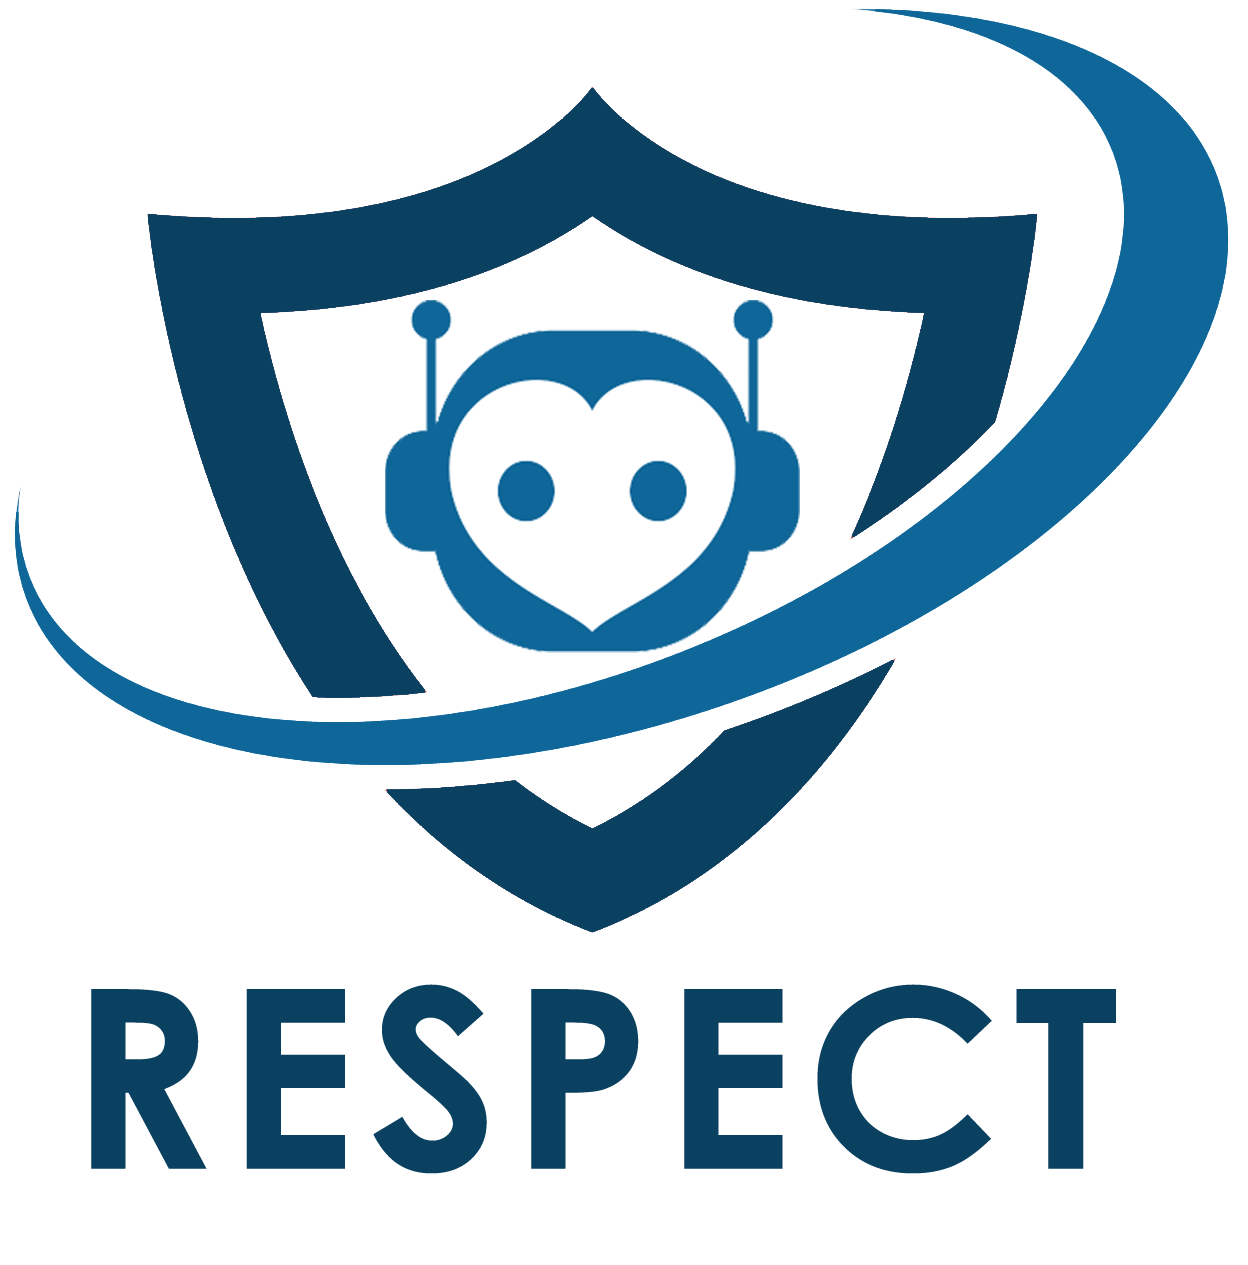 Respect project logo